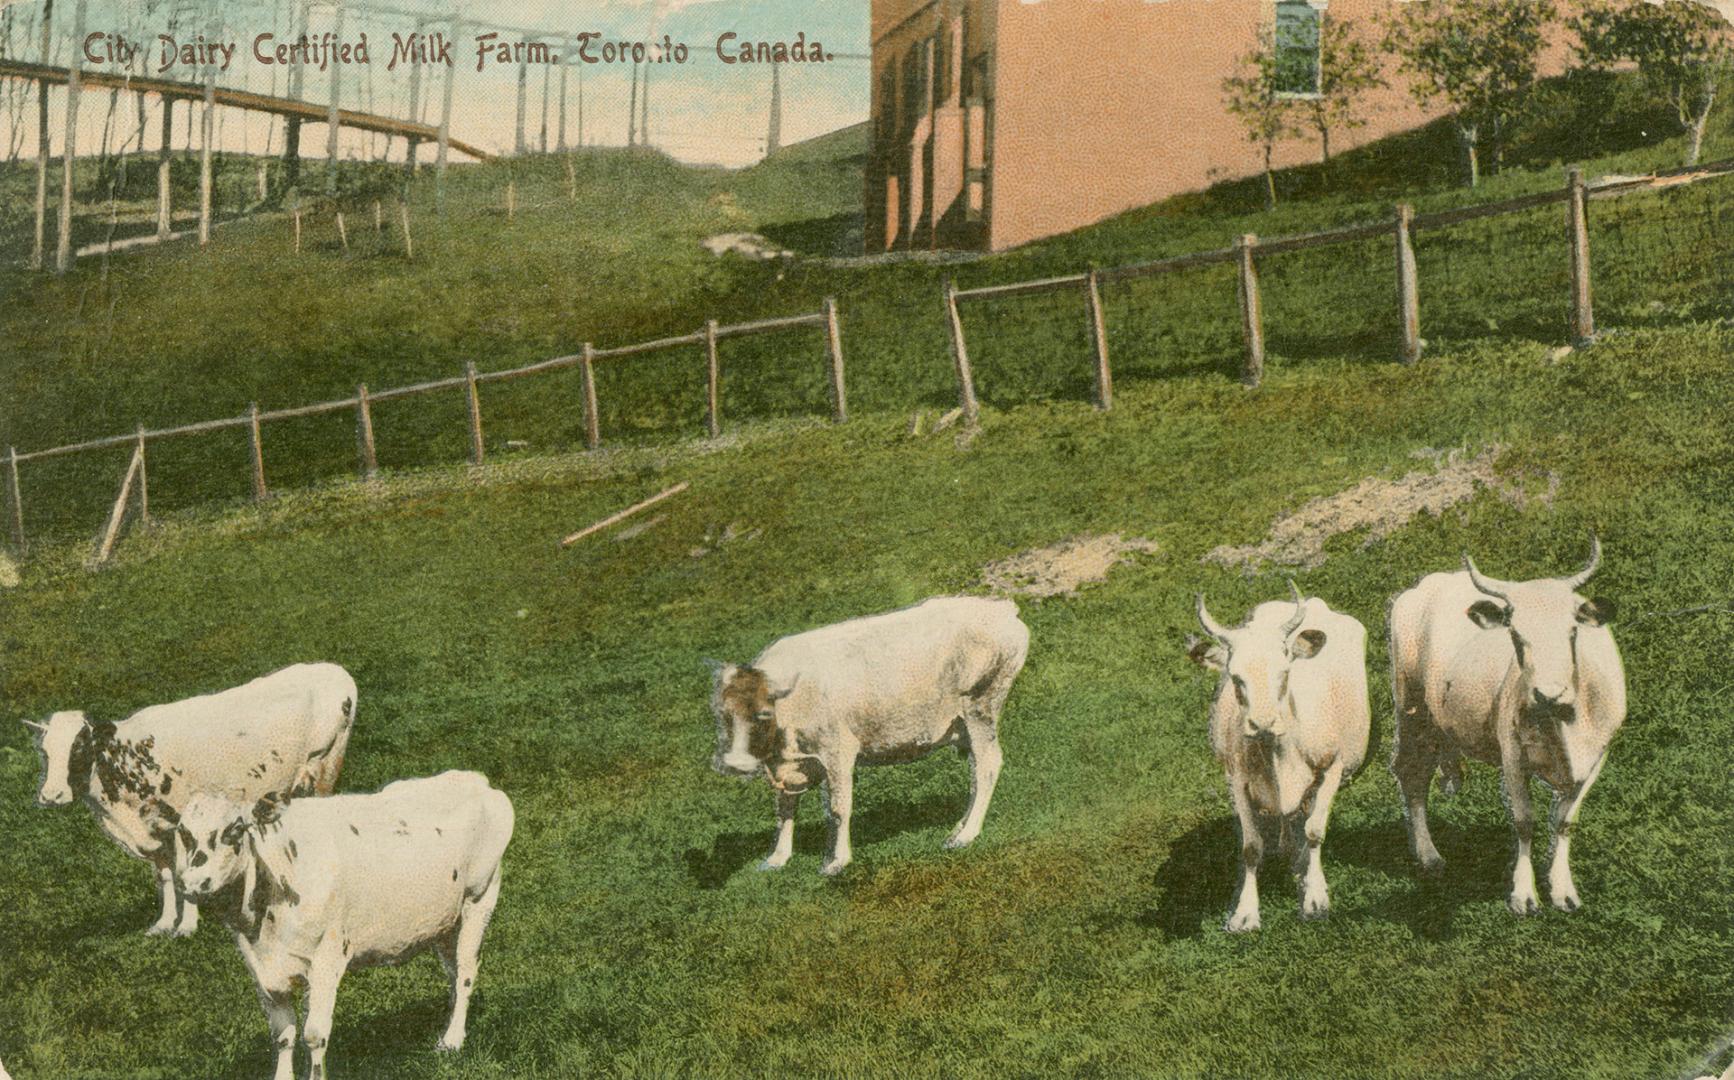 Five Jersey cows in a penned in area on a farm.